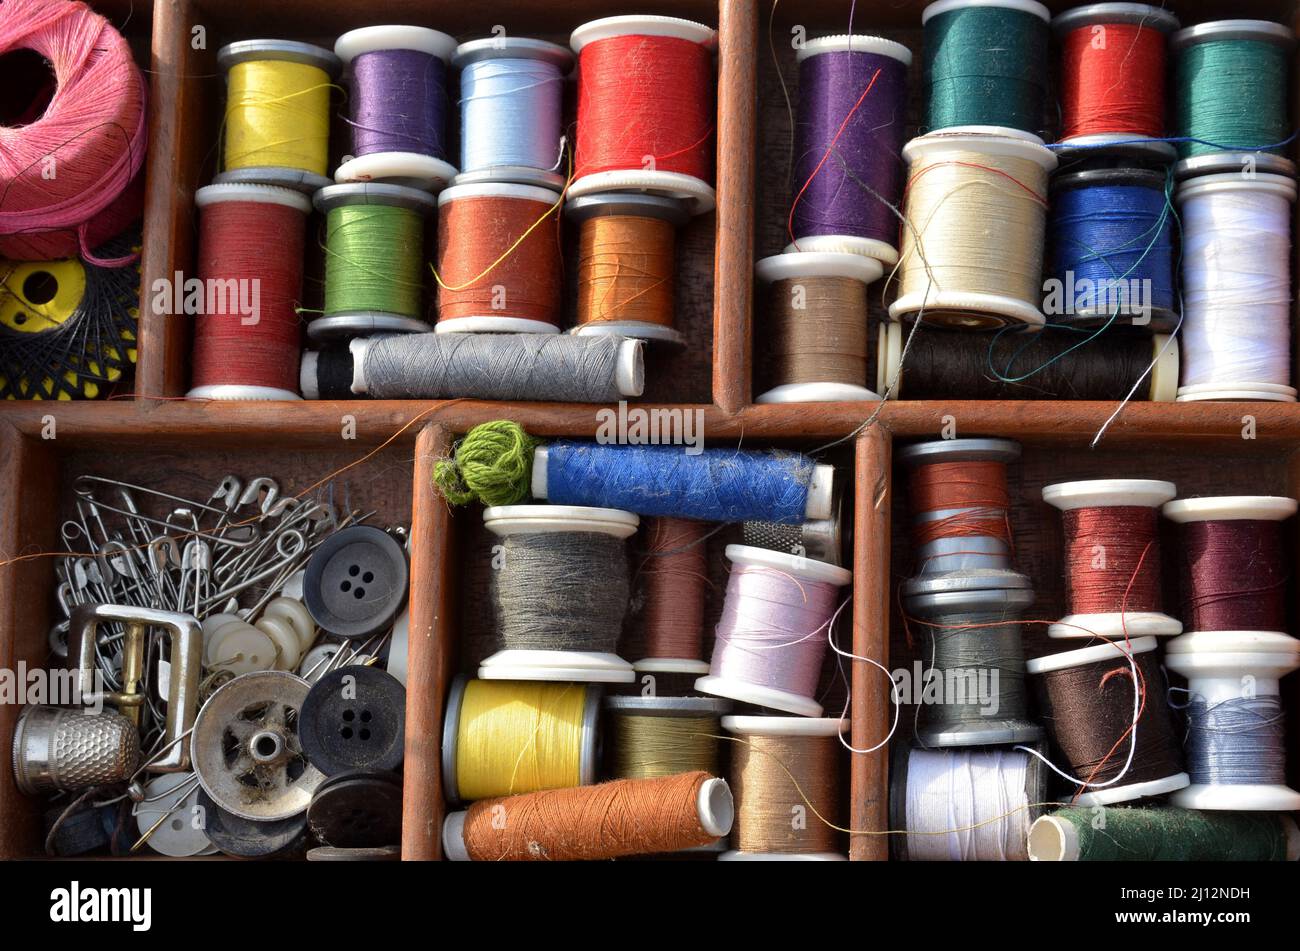 View into a workbasket with spools of sewing thread in many colours. Stock Photo